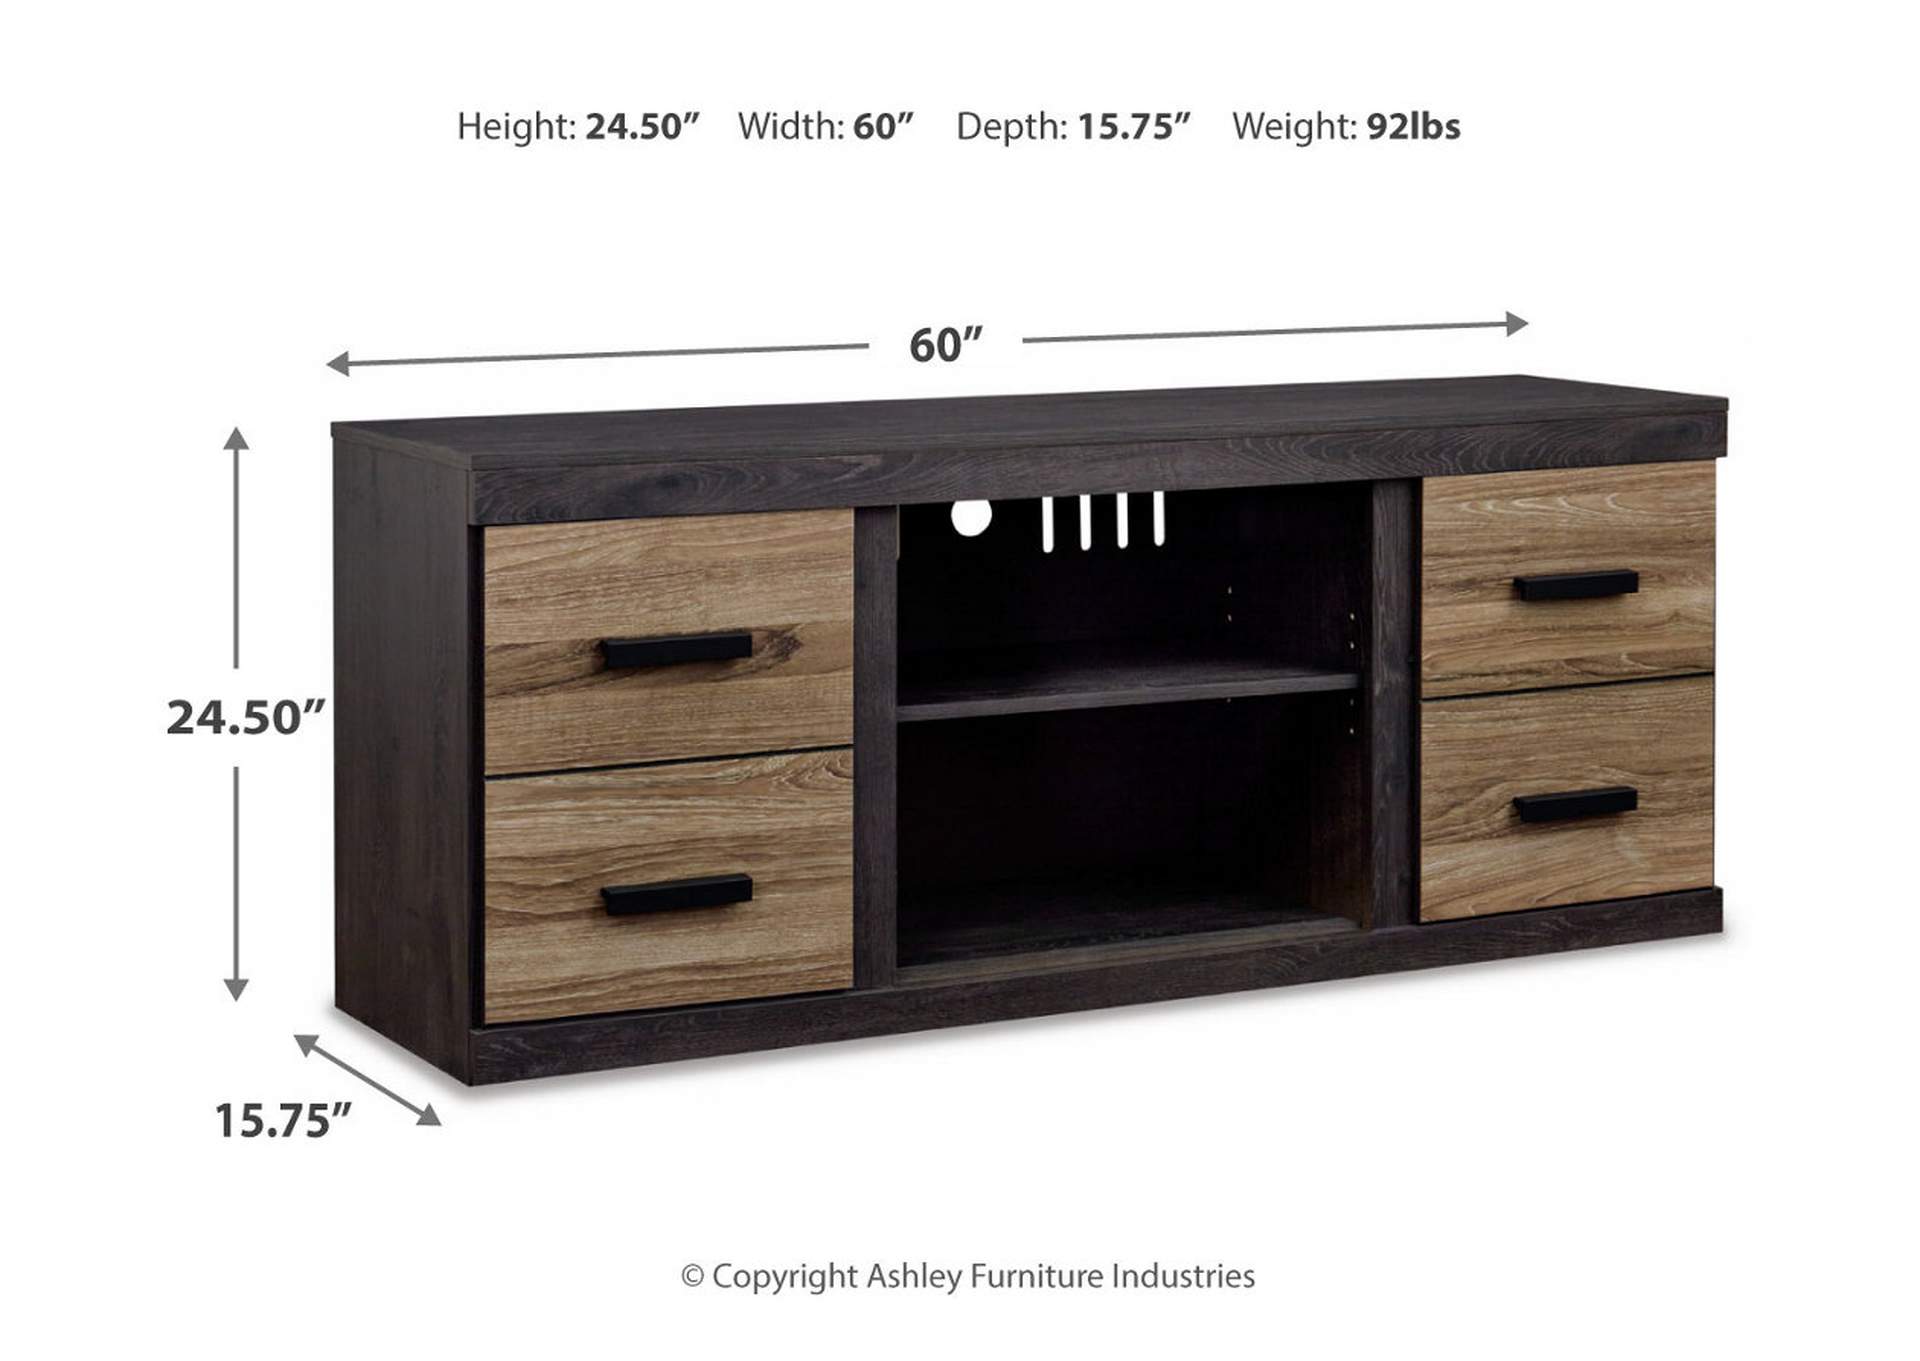 Harlinton 60" TV Stand,Signature Design By Ashley